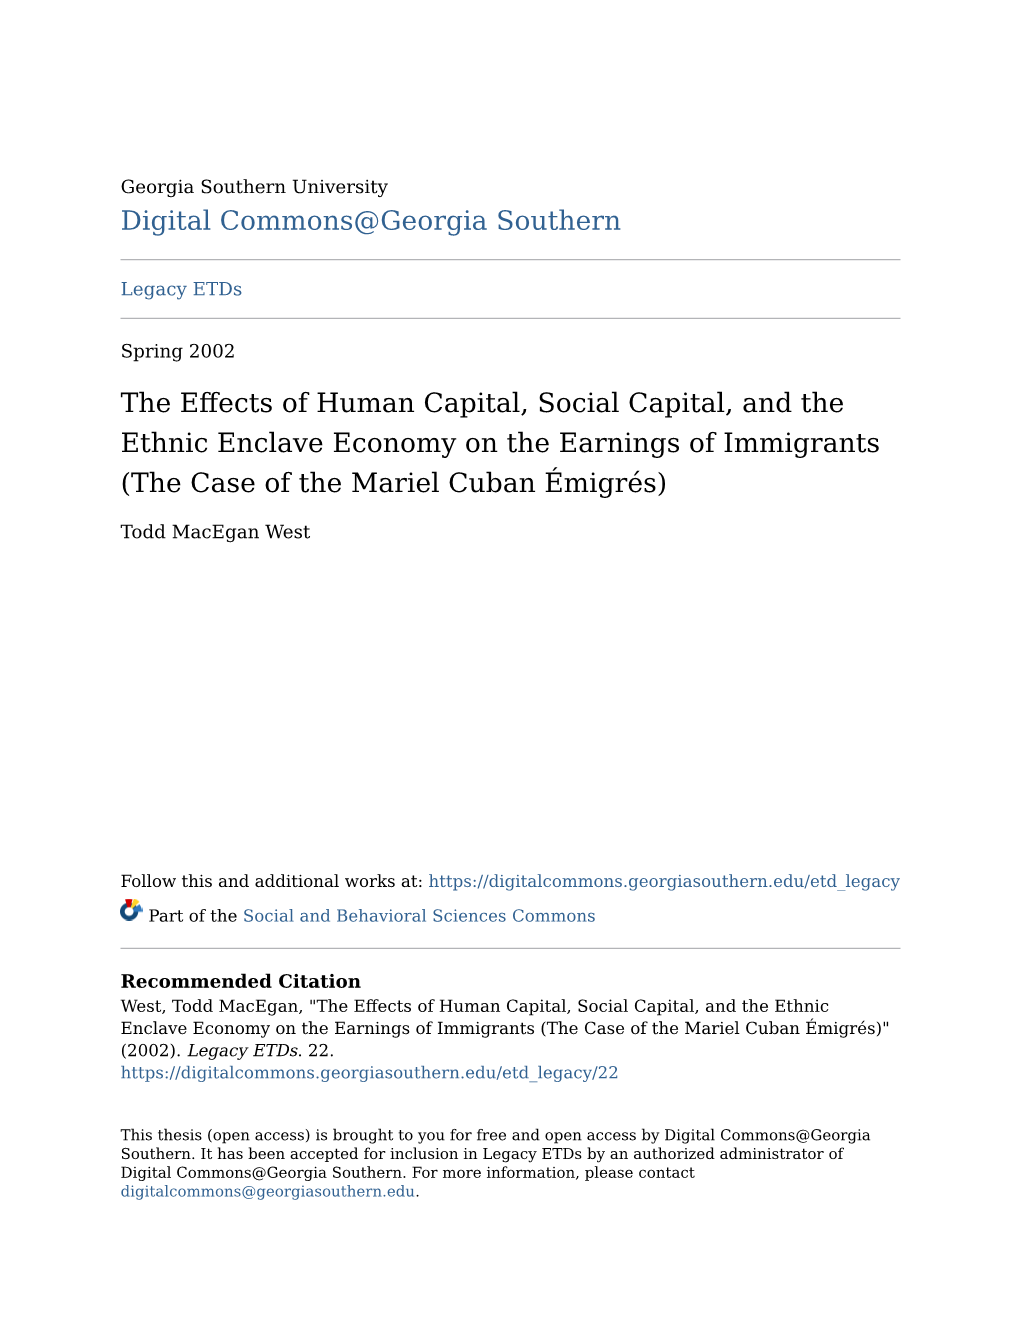 The Effects of Human Capital, Social Capital, and the Ethnic Enclave Economy on the Earnings of Immigrants (The Case of the Mariel Cuban Émigrés)